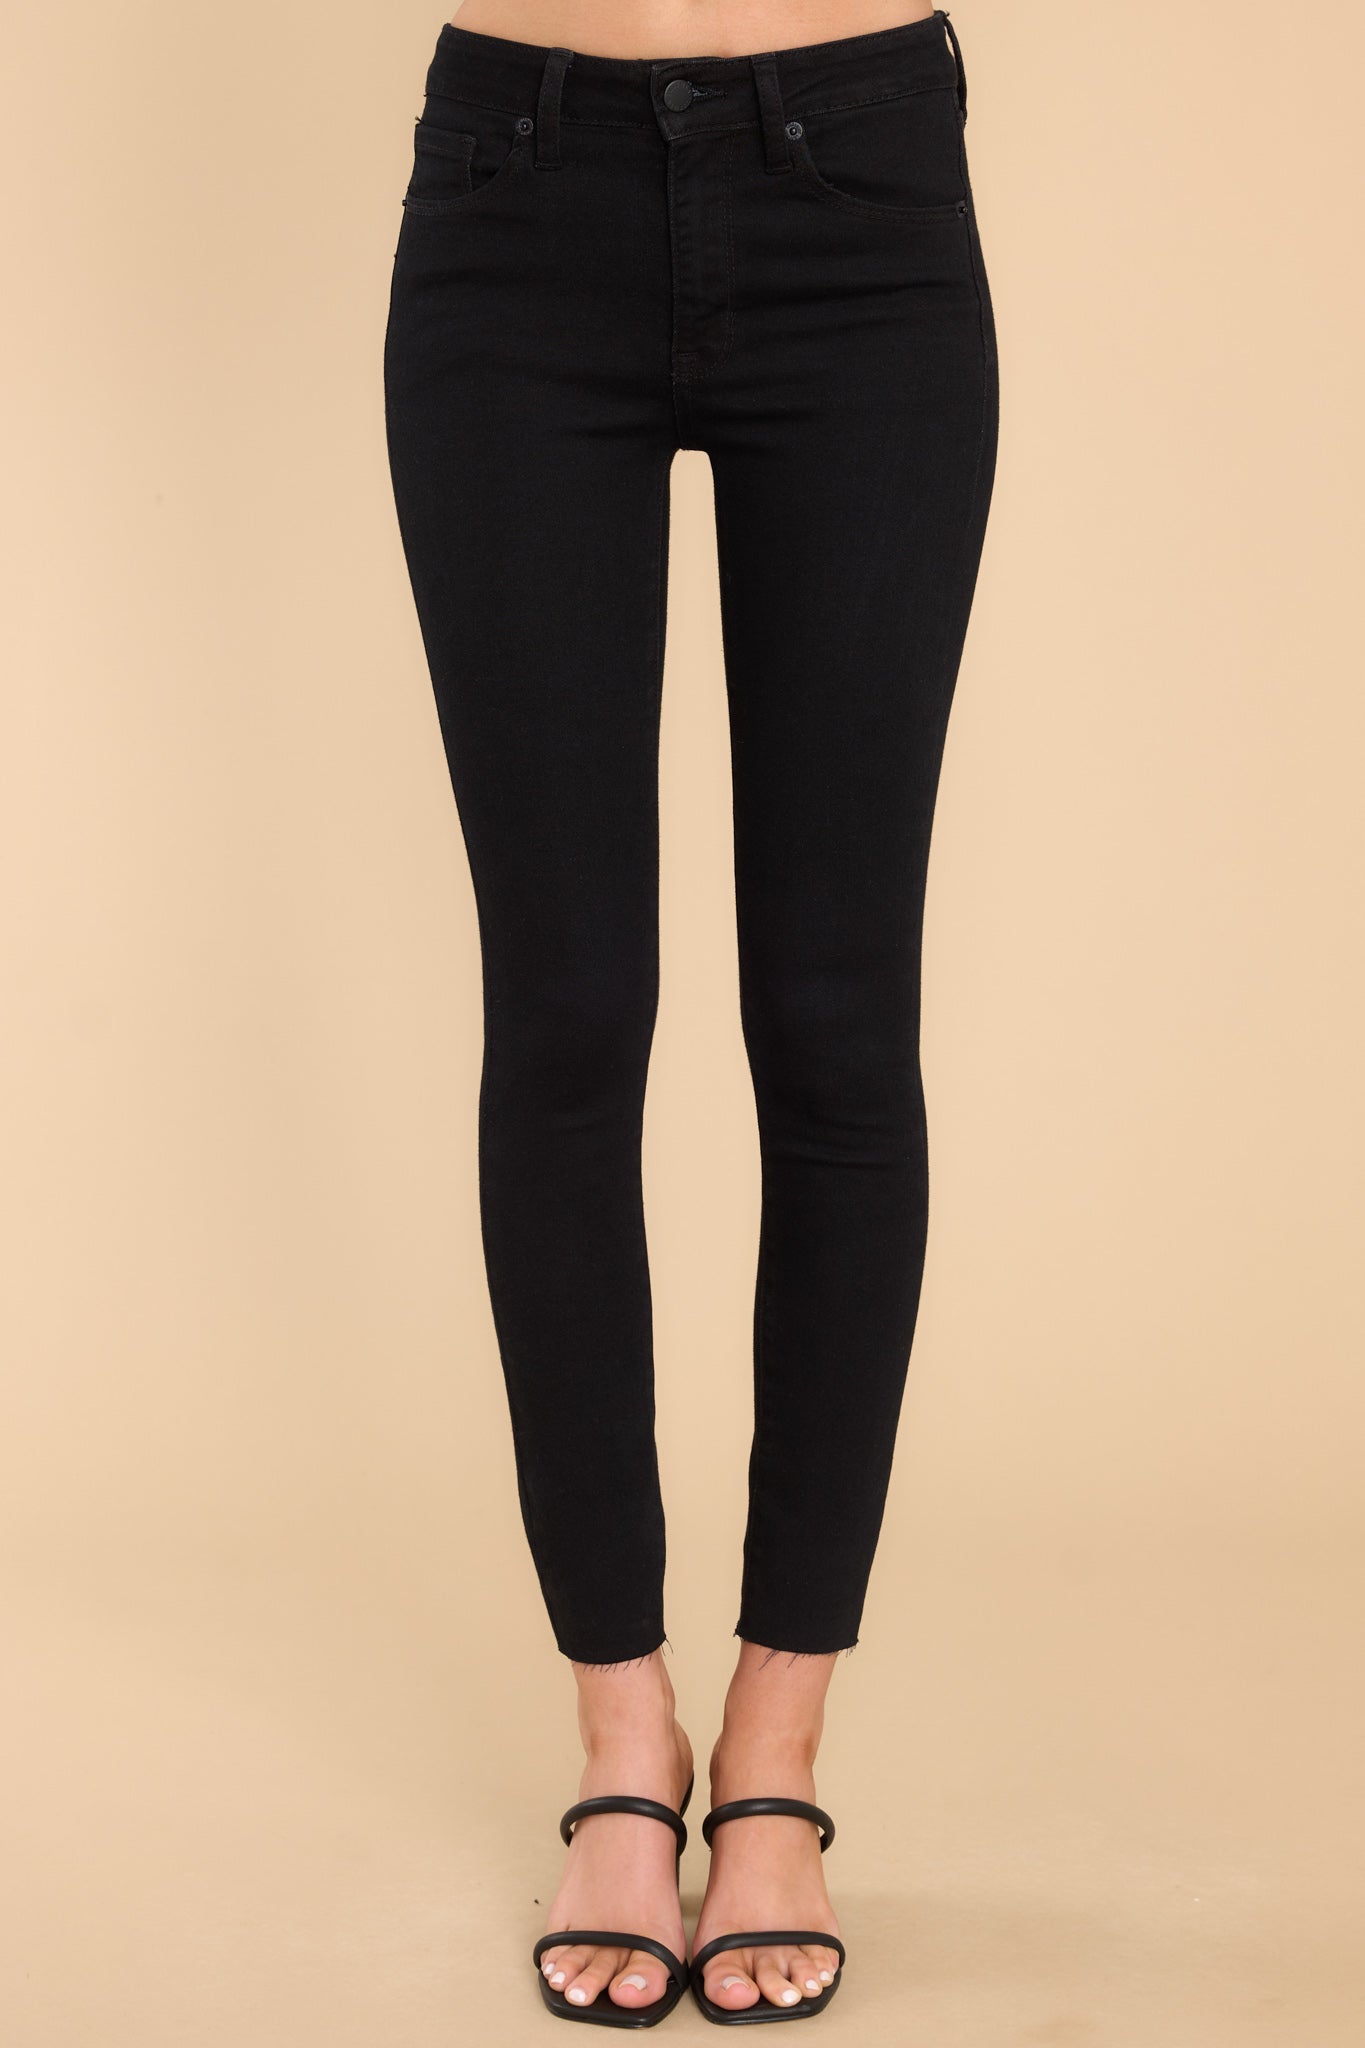 Classic Black Skinny Jeans - All Bottoms | Red Dress